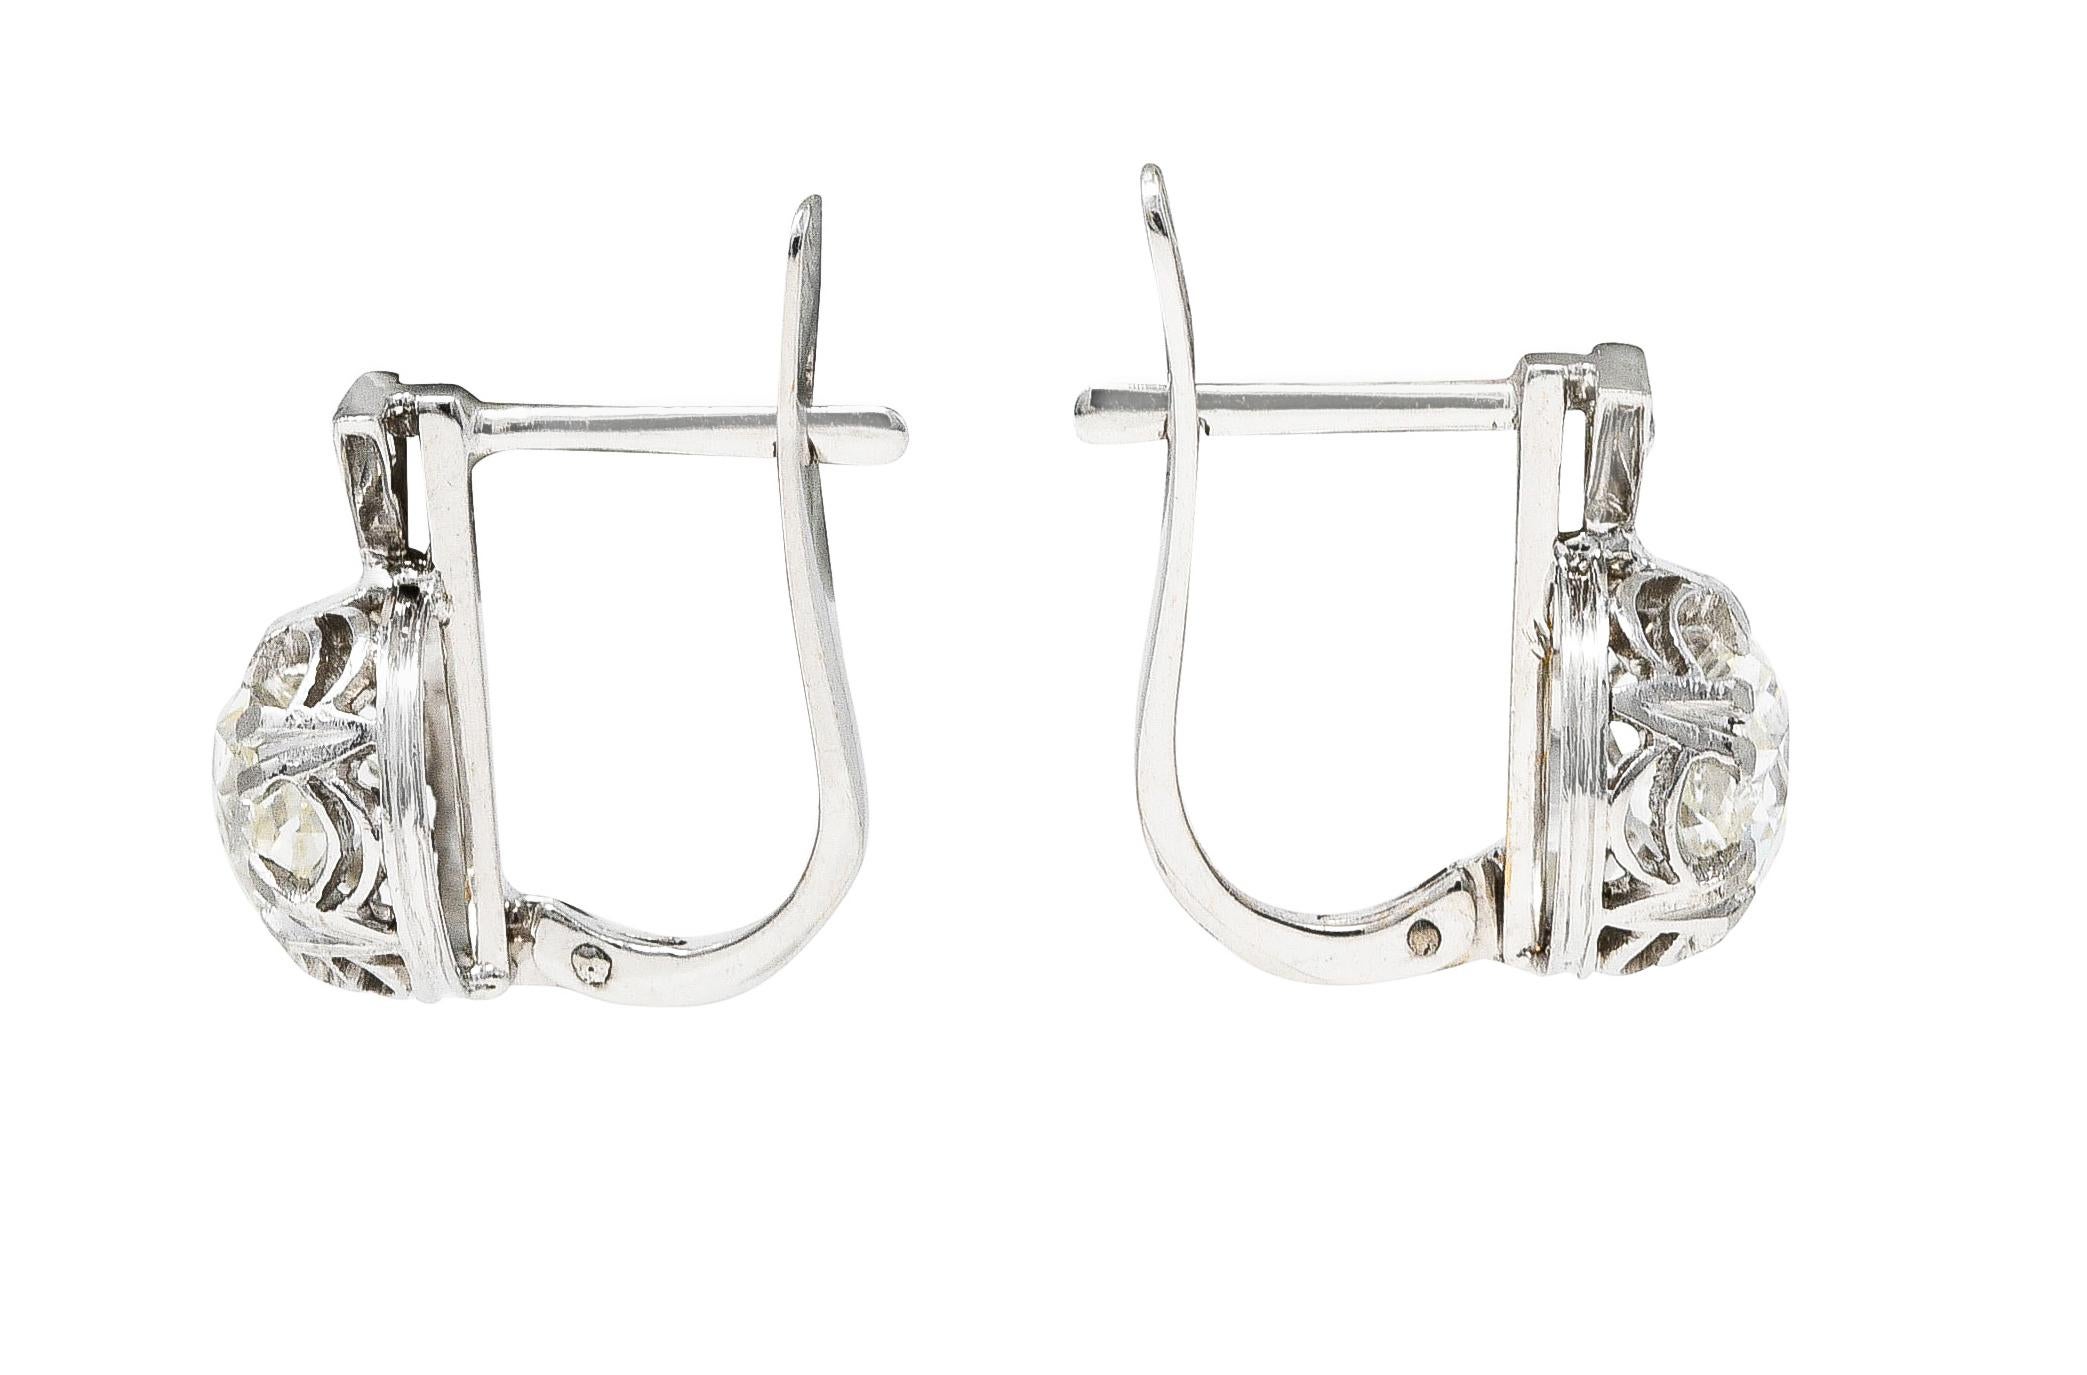 Huggie earrings have a triangular form surmount accented by an old single cut diamond. Weighing collectively approximately 0.07 carat with I color and SI clarity. Mounting is decoratively pierced as swagged latticework.  Featuring old mine cut